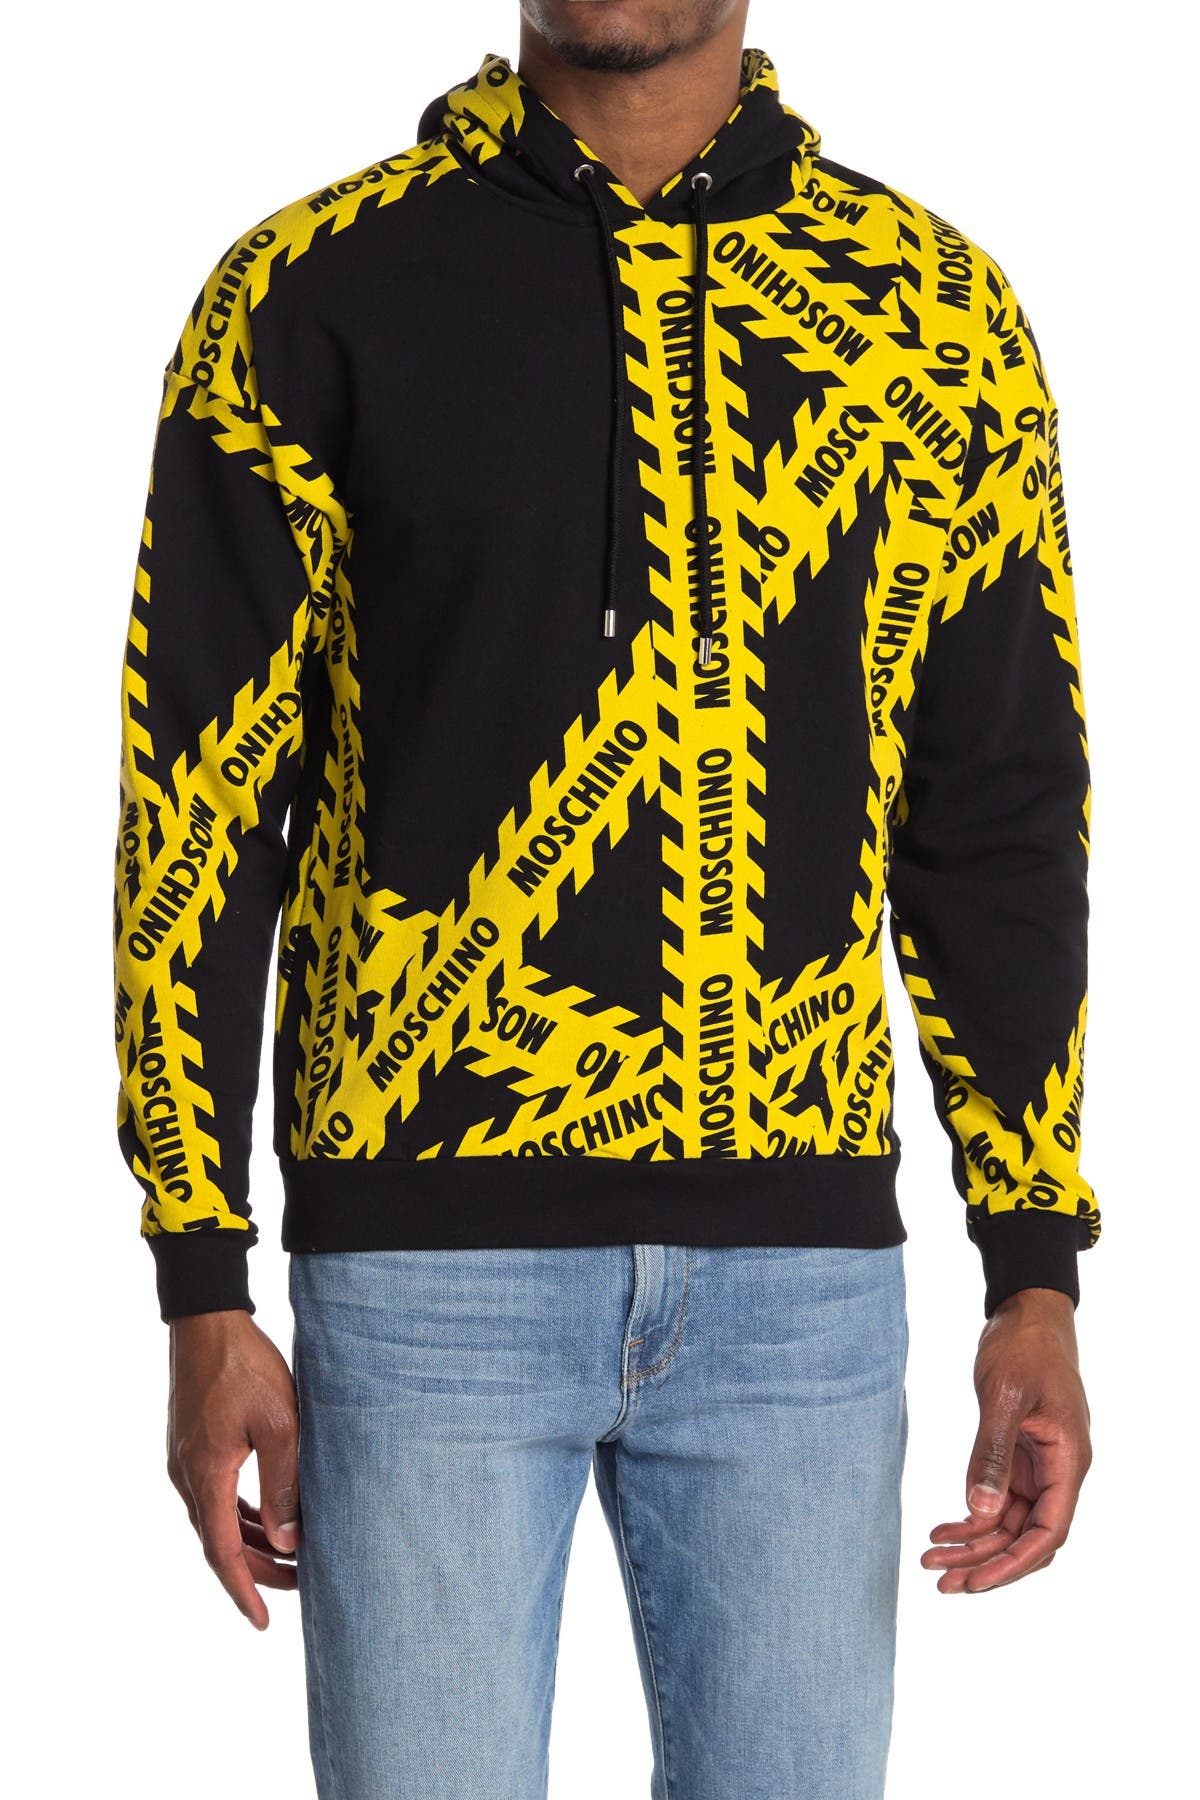 moschino pullover hoodie